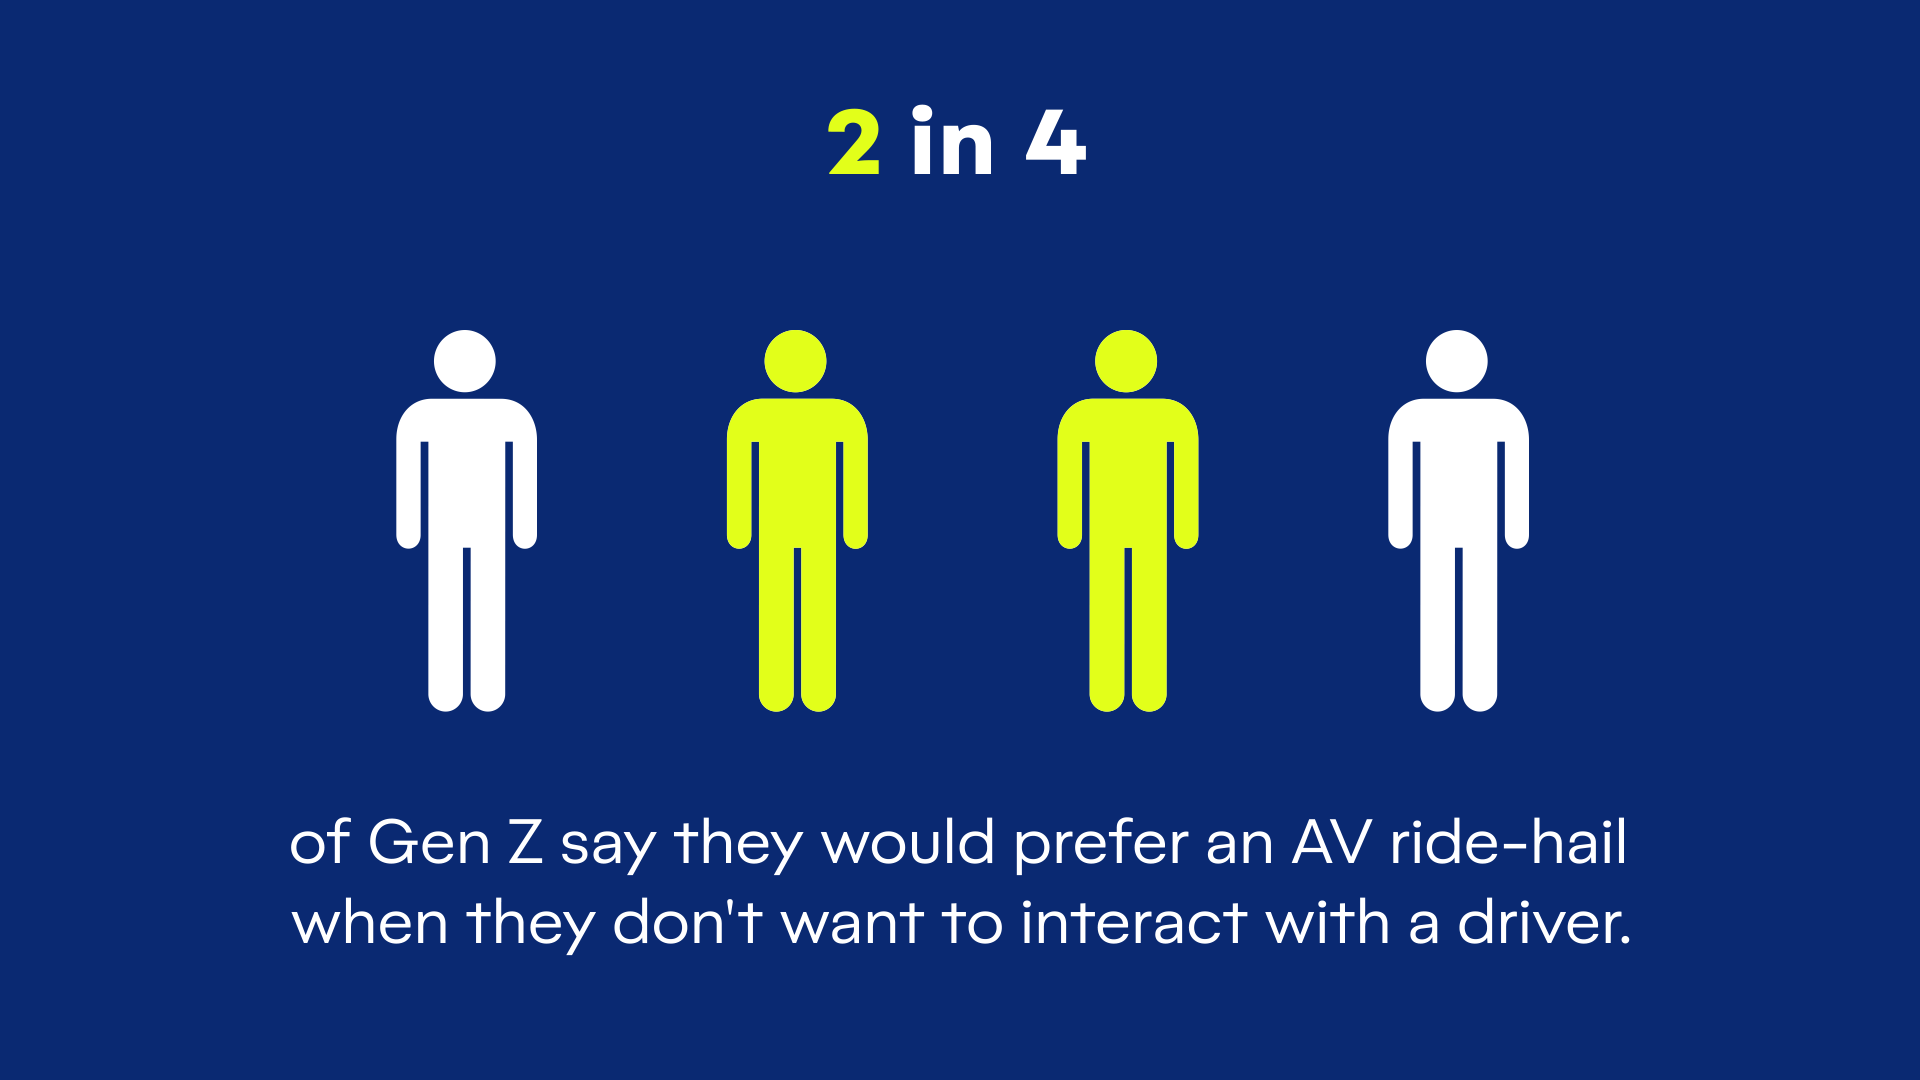 A chart showing that 2 in 4 Gen Zers would choose a driverless vehicle to avoid talking to another person